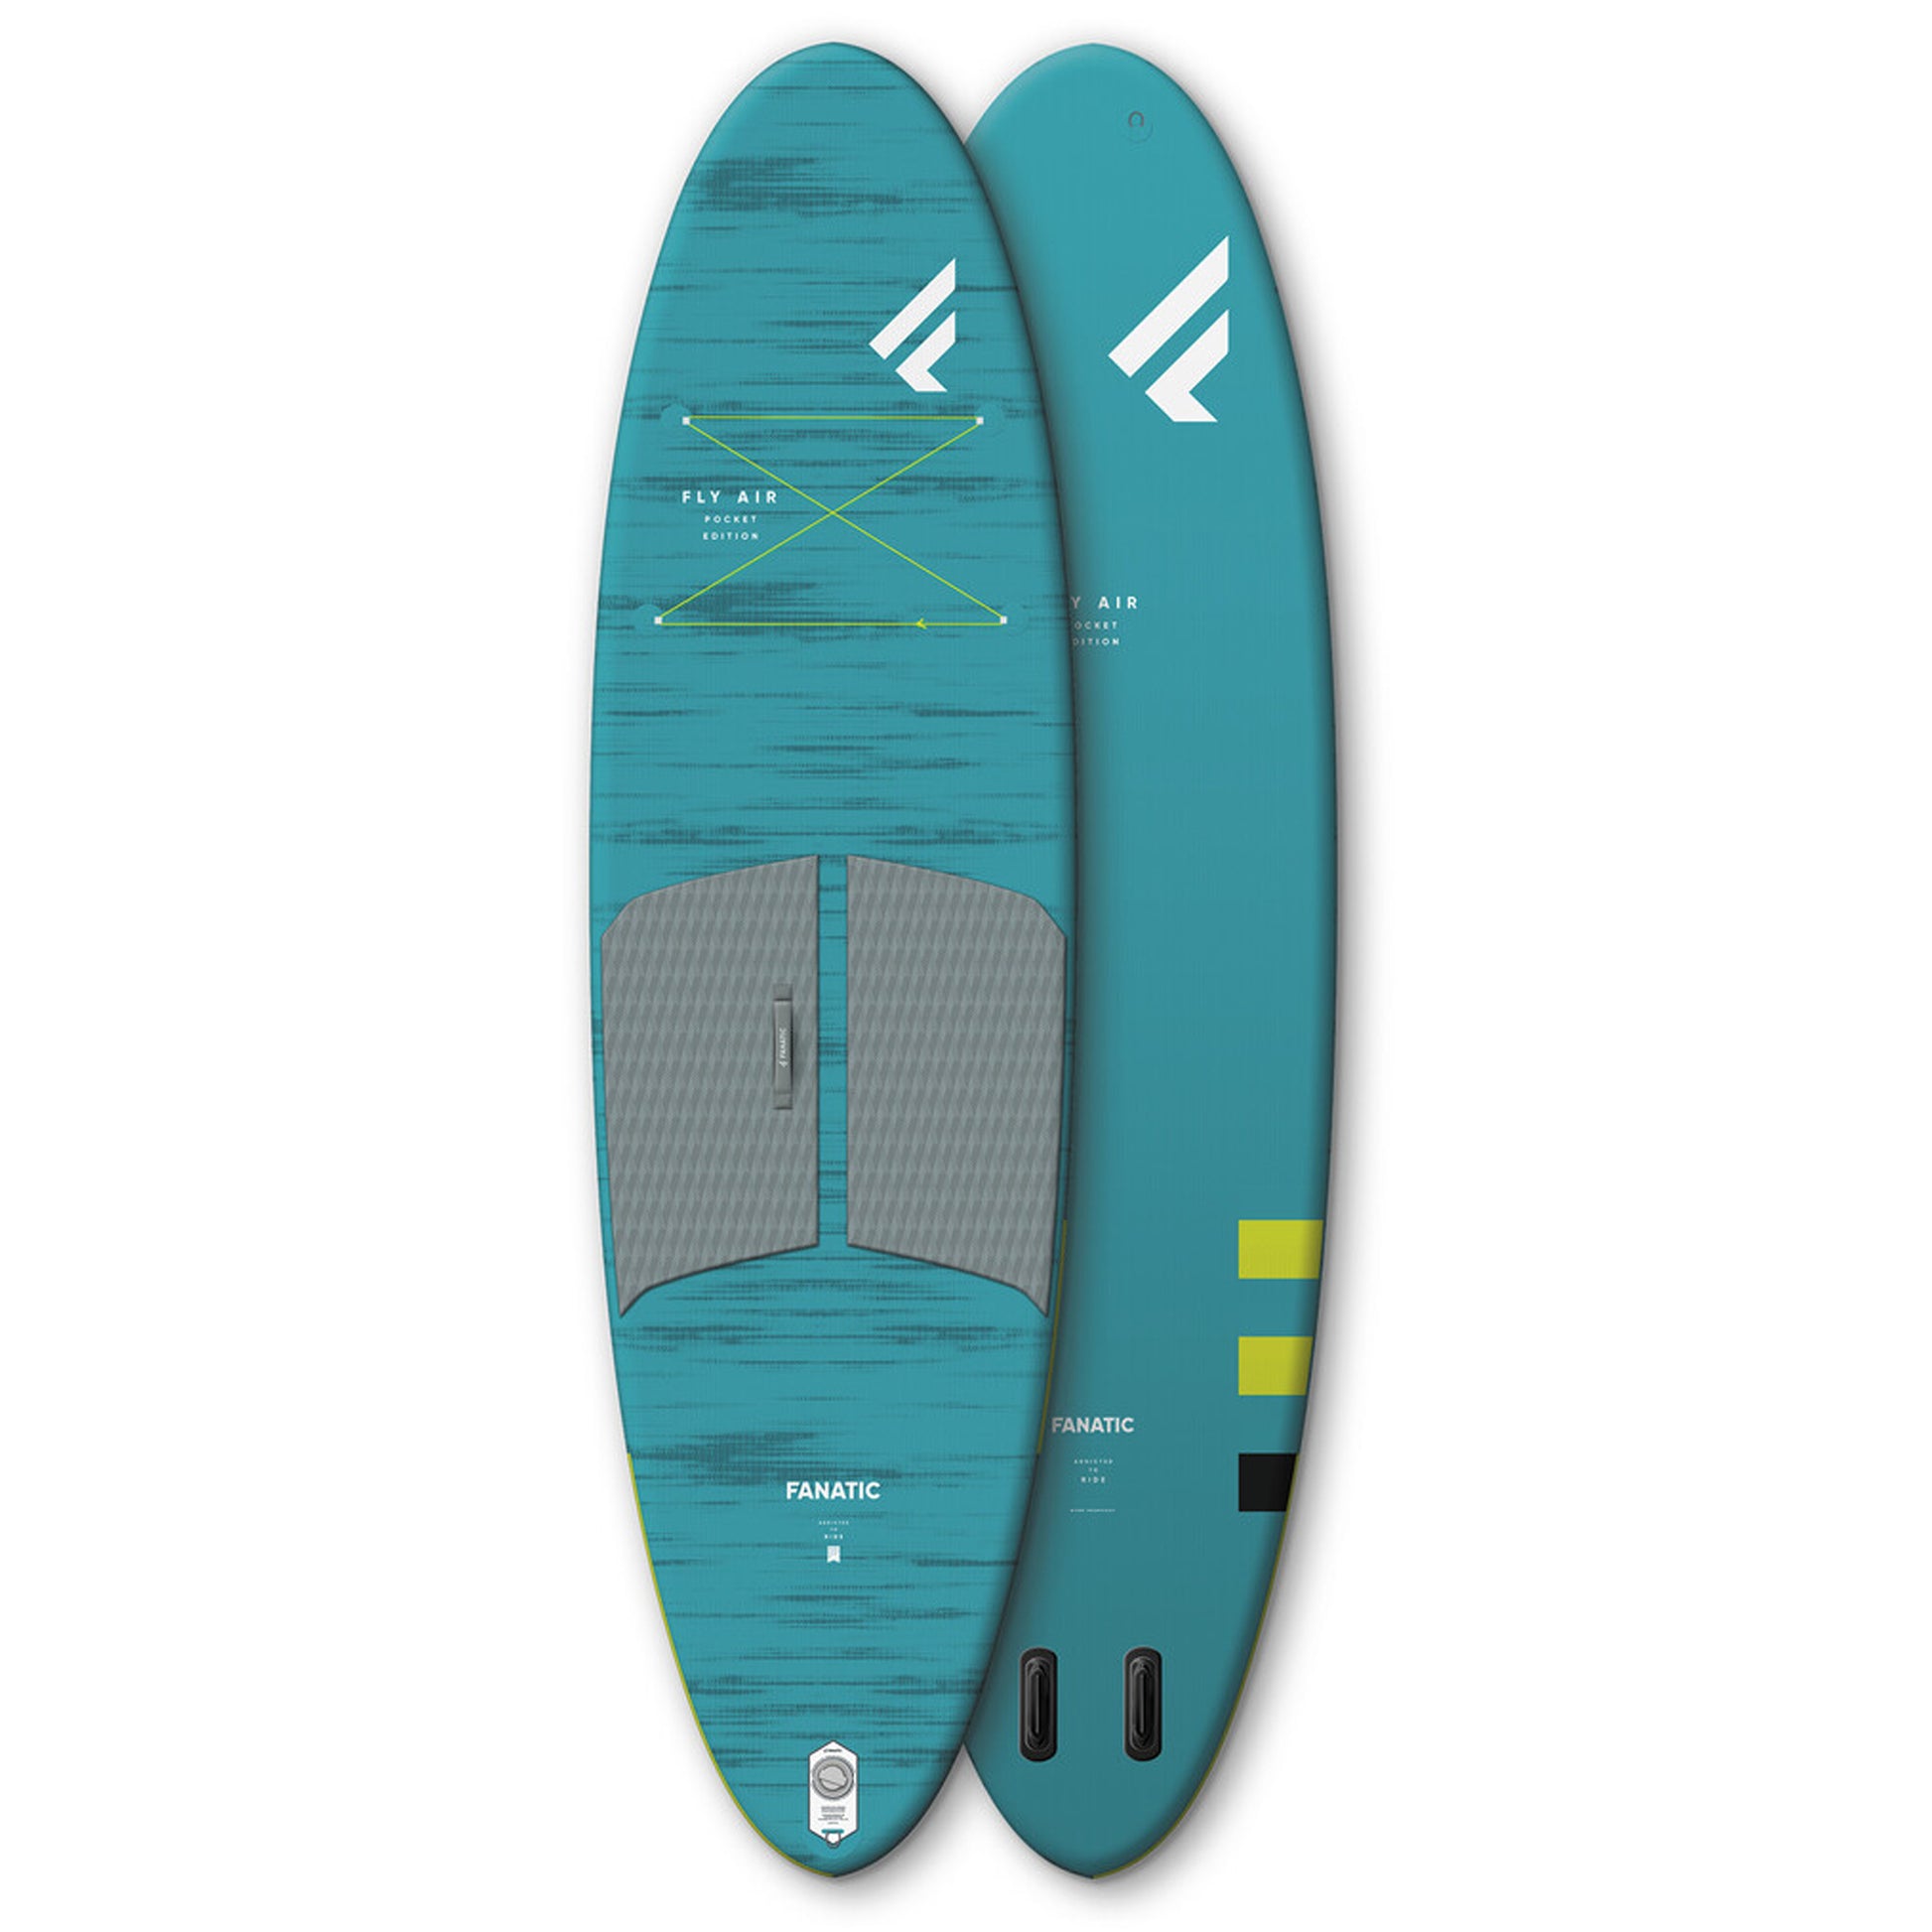 Fanatic iSUP Fly Air Pocket – SUP Inflatable Board